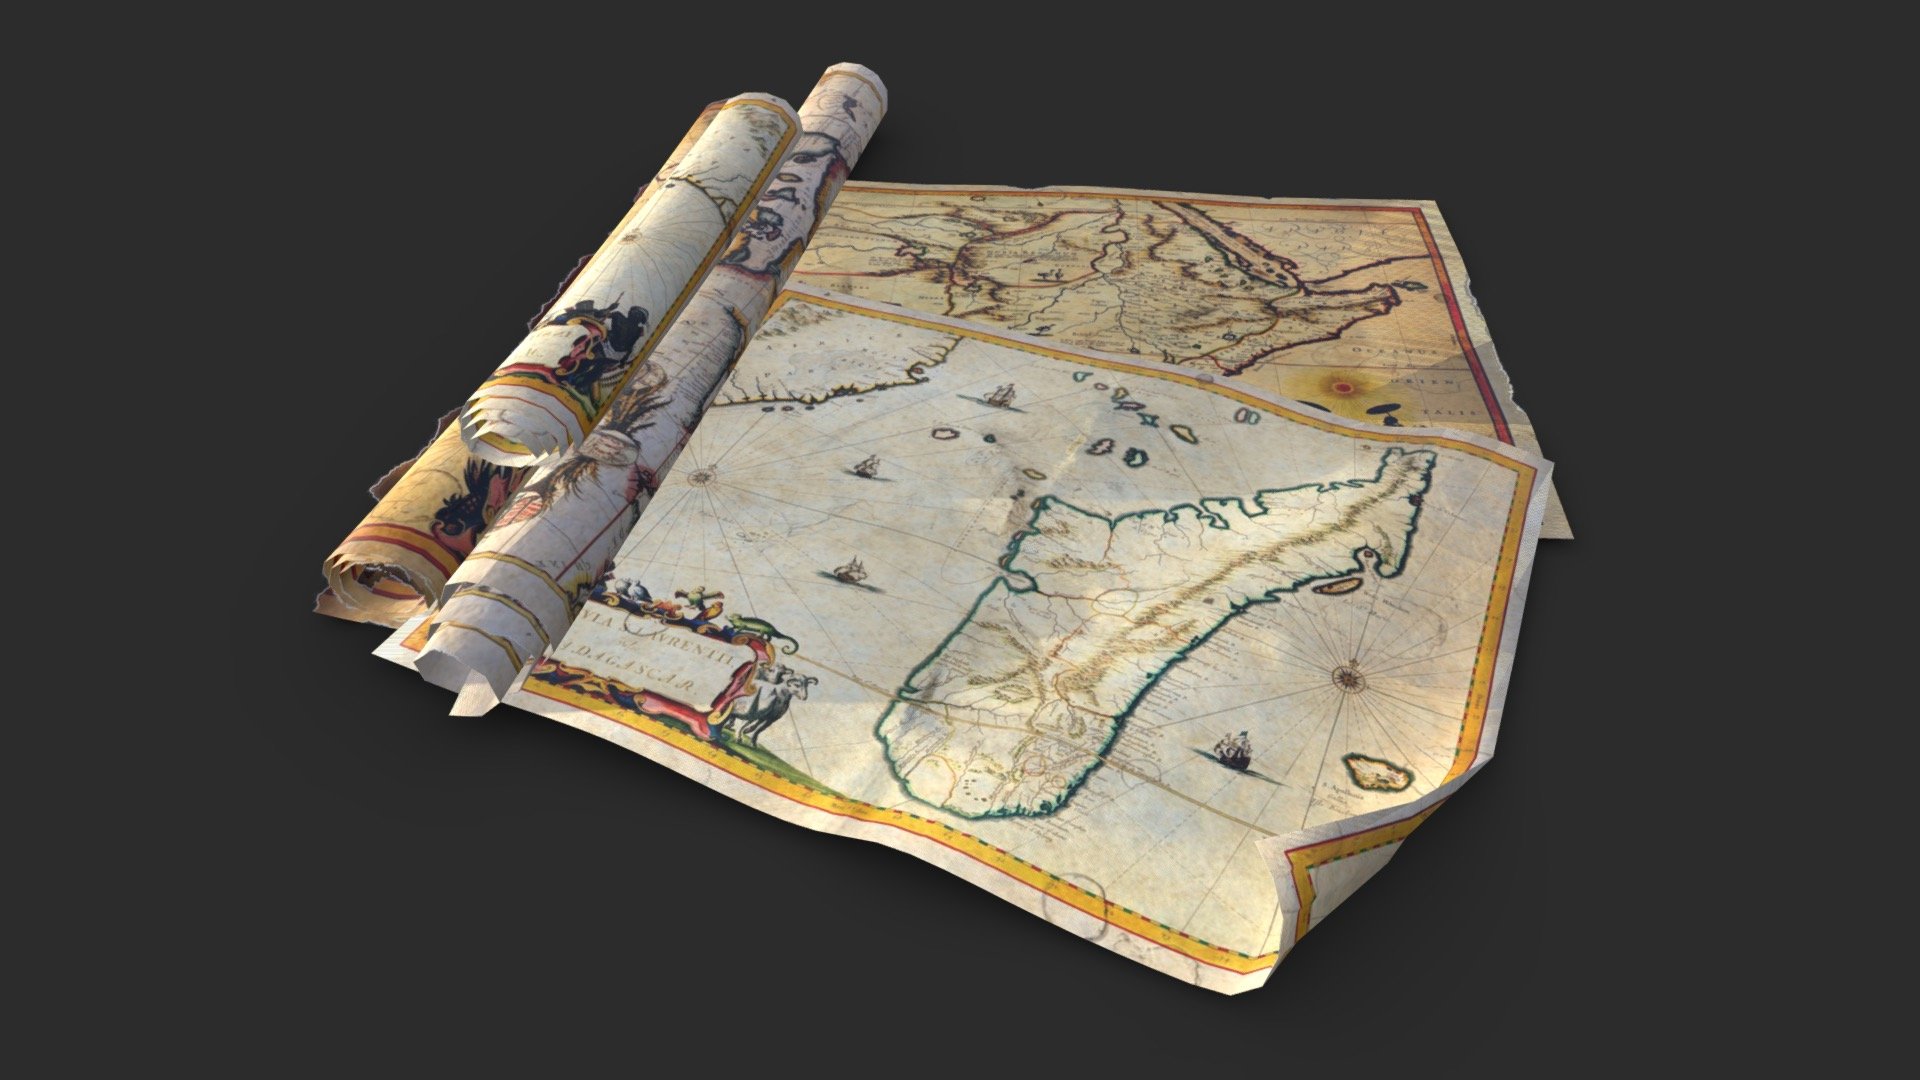 This vintage historical African maps pack including 12 individual objects (4 designs for 3 meshes types each) with 3 LODs and collision boxes to get the best optimization and the best quality for the most popular game engines. All elements can easily be positioned together to create a more detailed scene.

The 3 meshes :
* Rolled maps
* Curved corners maps
* Flatted maps

This AAA game asset of old parchments will embellish you scene and add more details which can help the gameplay and the game-design.

Low-poly model &amp; Blender native 2.91

SPECIFICATIONS

Objects : 12
Polygons : 1446
Subdivision ready : Yes
Render engine : Eevee (Cycles ready)

GAME SPECS

LODs : Yes (inside FBX for Unity &amp; Unreal)
Numbers of LODs : 3
Collider : Yes
Lightmap UV : No

EXPORTED FORMATS

FBX
Collada
OBJ

TEXTURES

Materials in scene : 1
Textures sizes : 4K
Textures types : Base Color, Metallic, Roughness, Normal (DirectX &amp; OpenGL), Heigh &amp; AO (also Unity &amp; Unreal workflow maps)
Textures format : PNG - Old African Maps - Buy Royalty Free 3D model by KangaroOz 3D (@KangaroOz-3D) 3d model